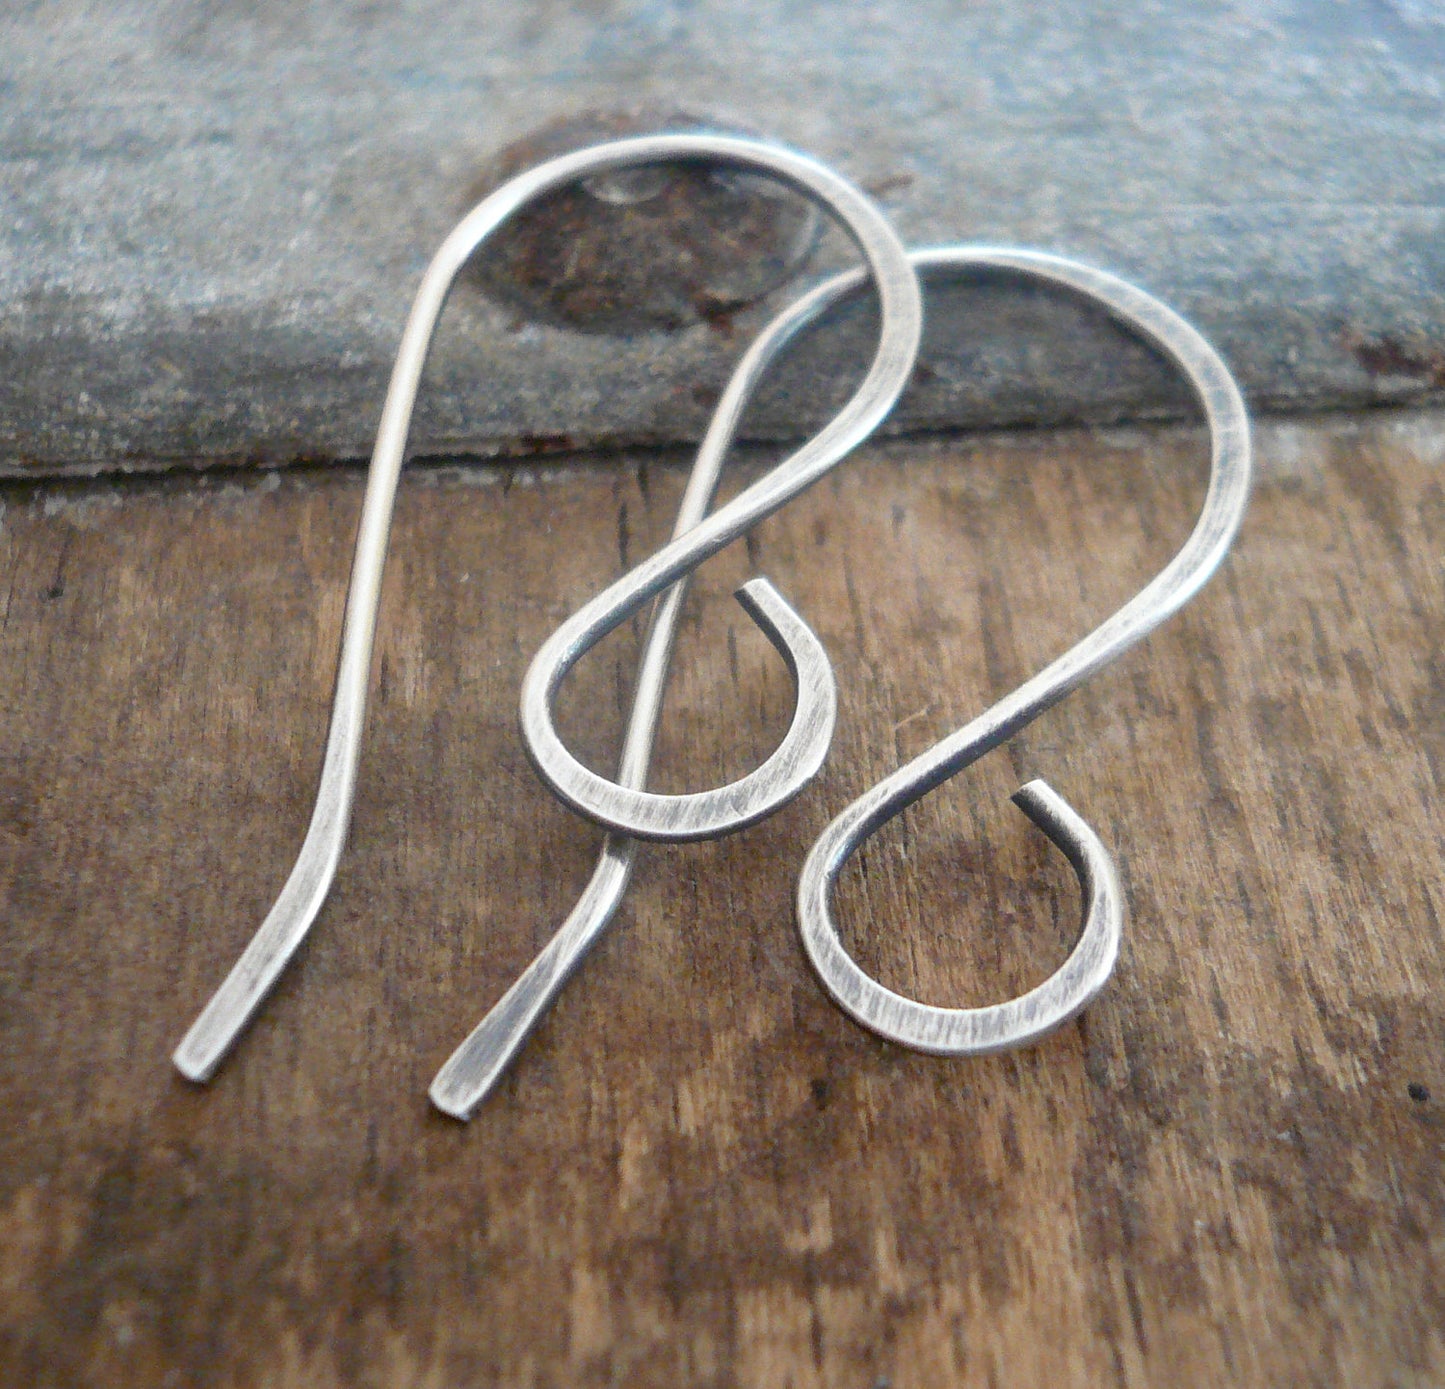 Large Loop Solitaire Sterling Silver Earwires - Handmade. Handforged. Oxidized & Polished